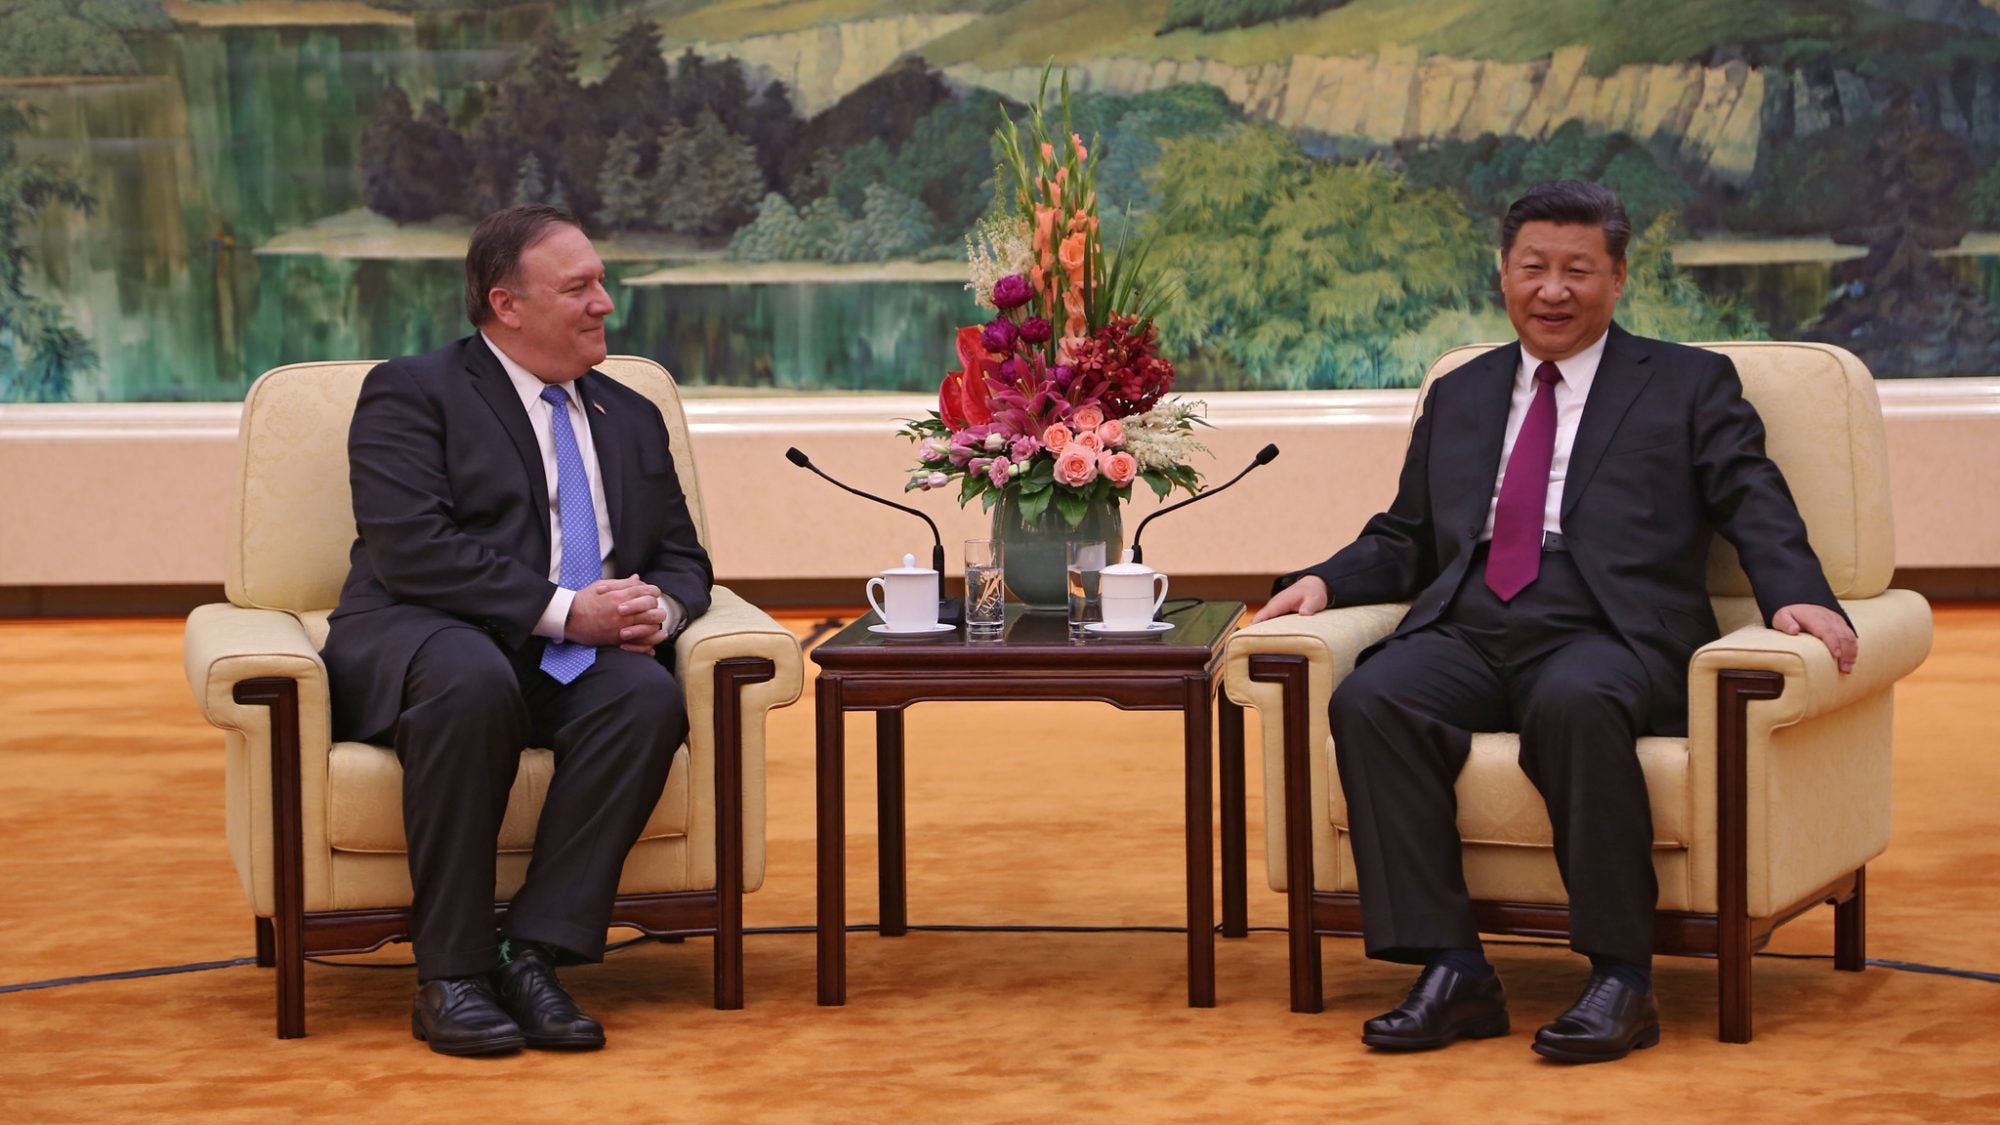 U.S. Secretary of State Mike Pompeo meets with Chinese President Xi Jinping at the Great Hall of the People in Beijing in 2018